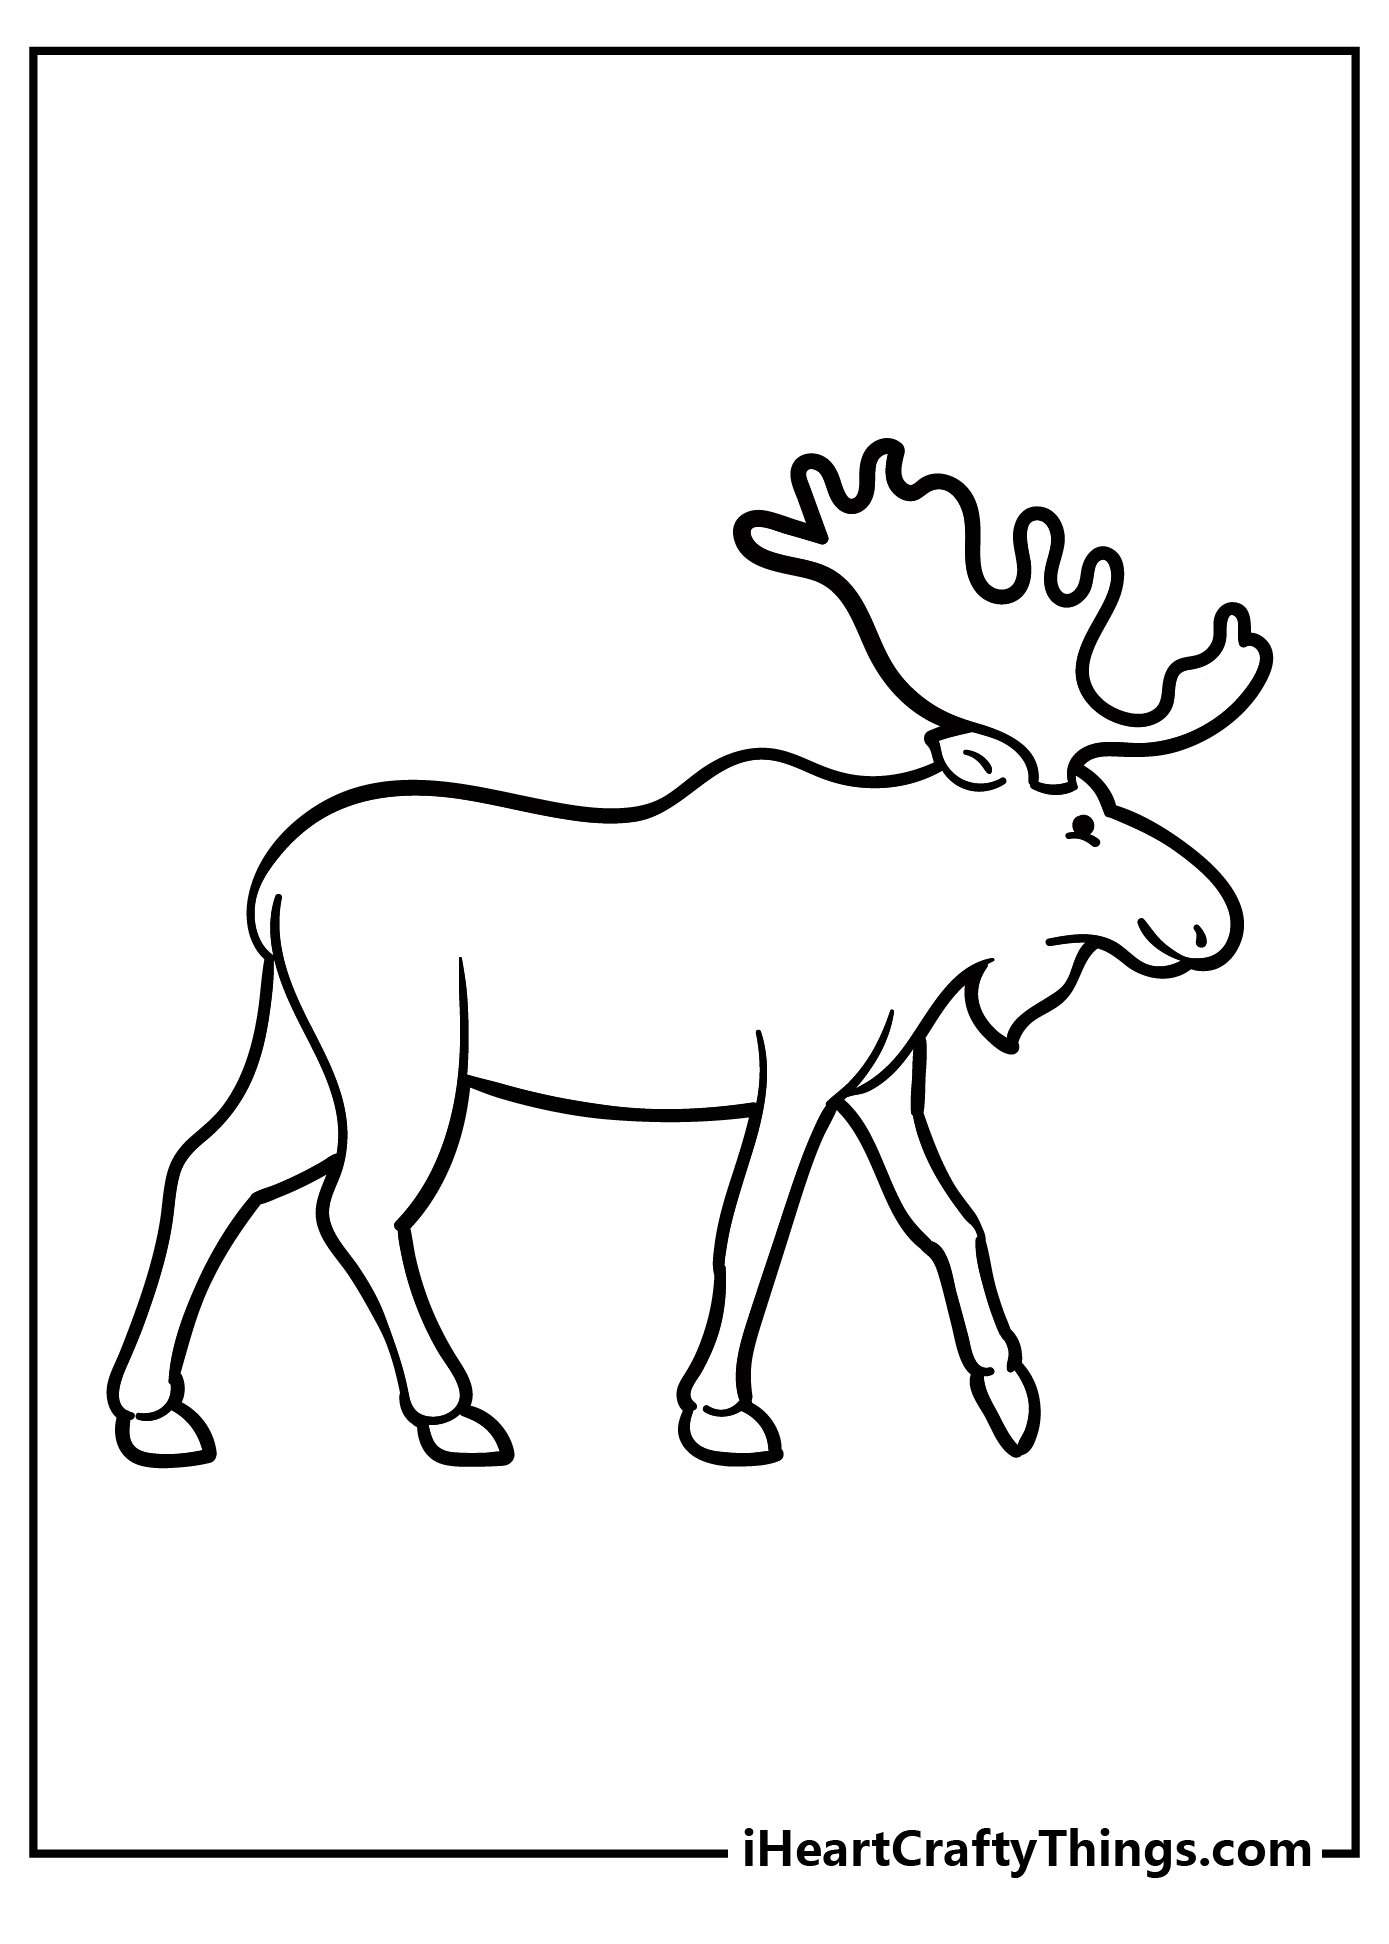 Moose Coloring Book for adults free download